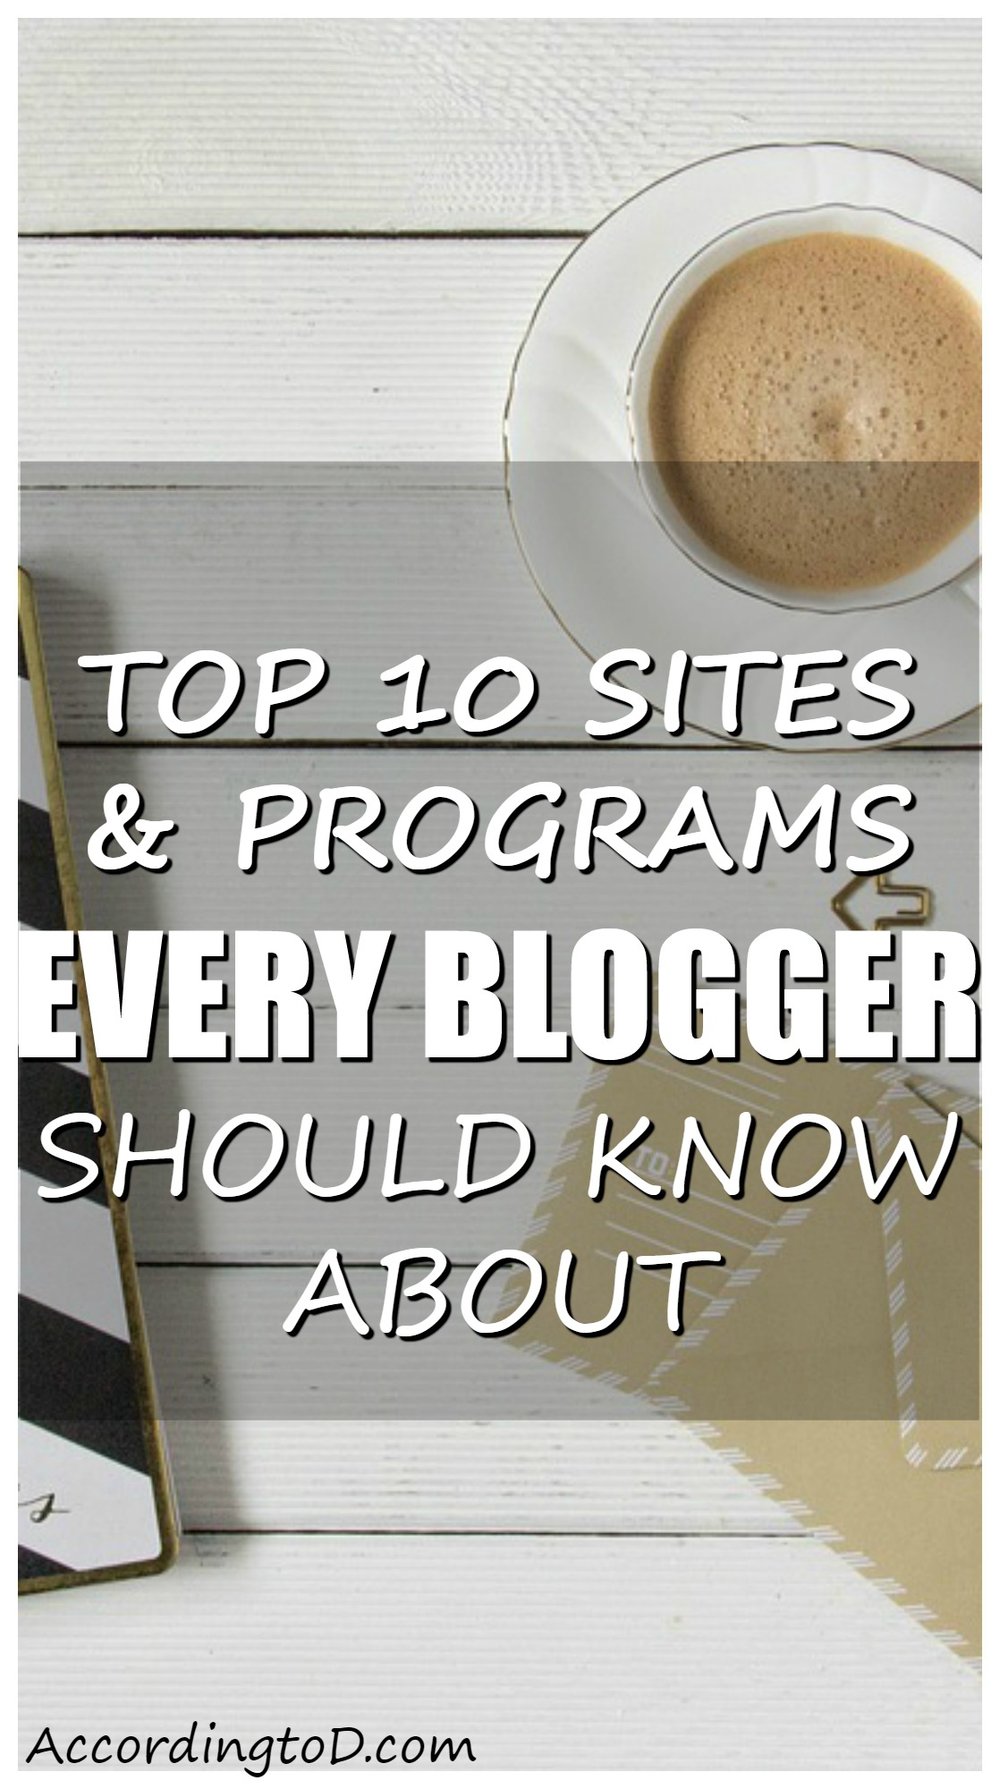 TOP 10 sites and programs for bloggers.jpg